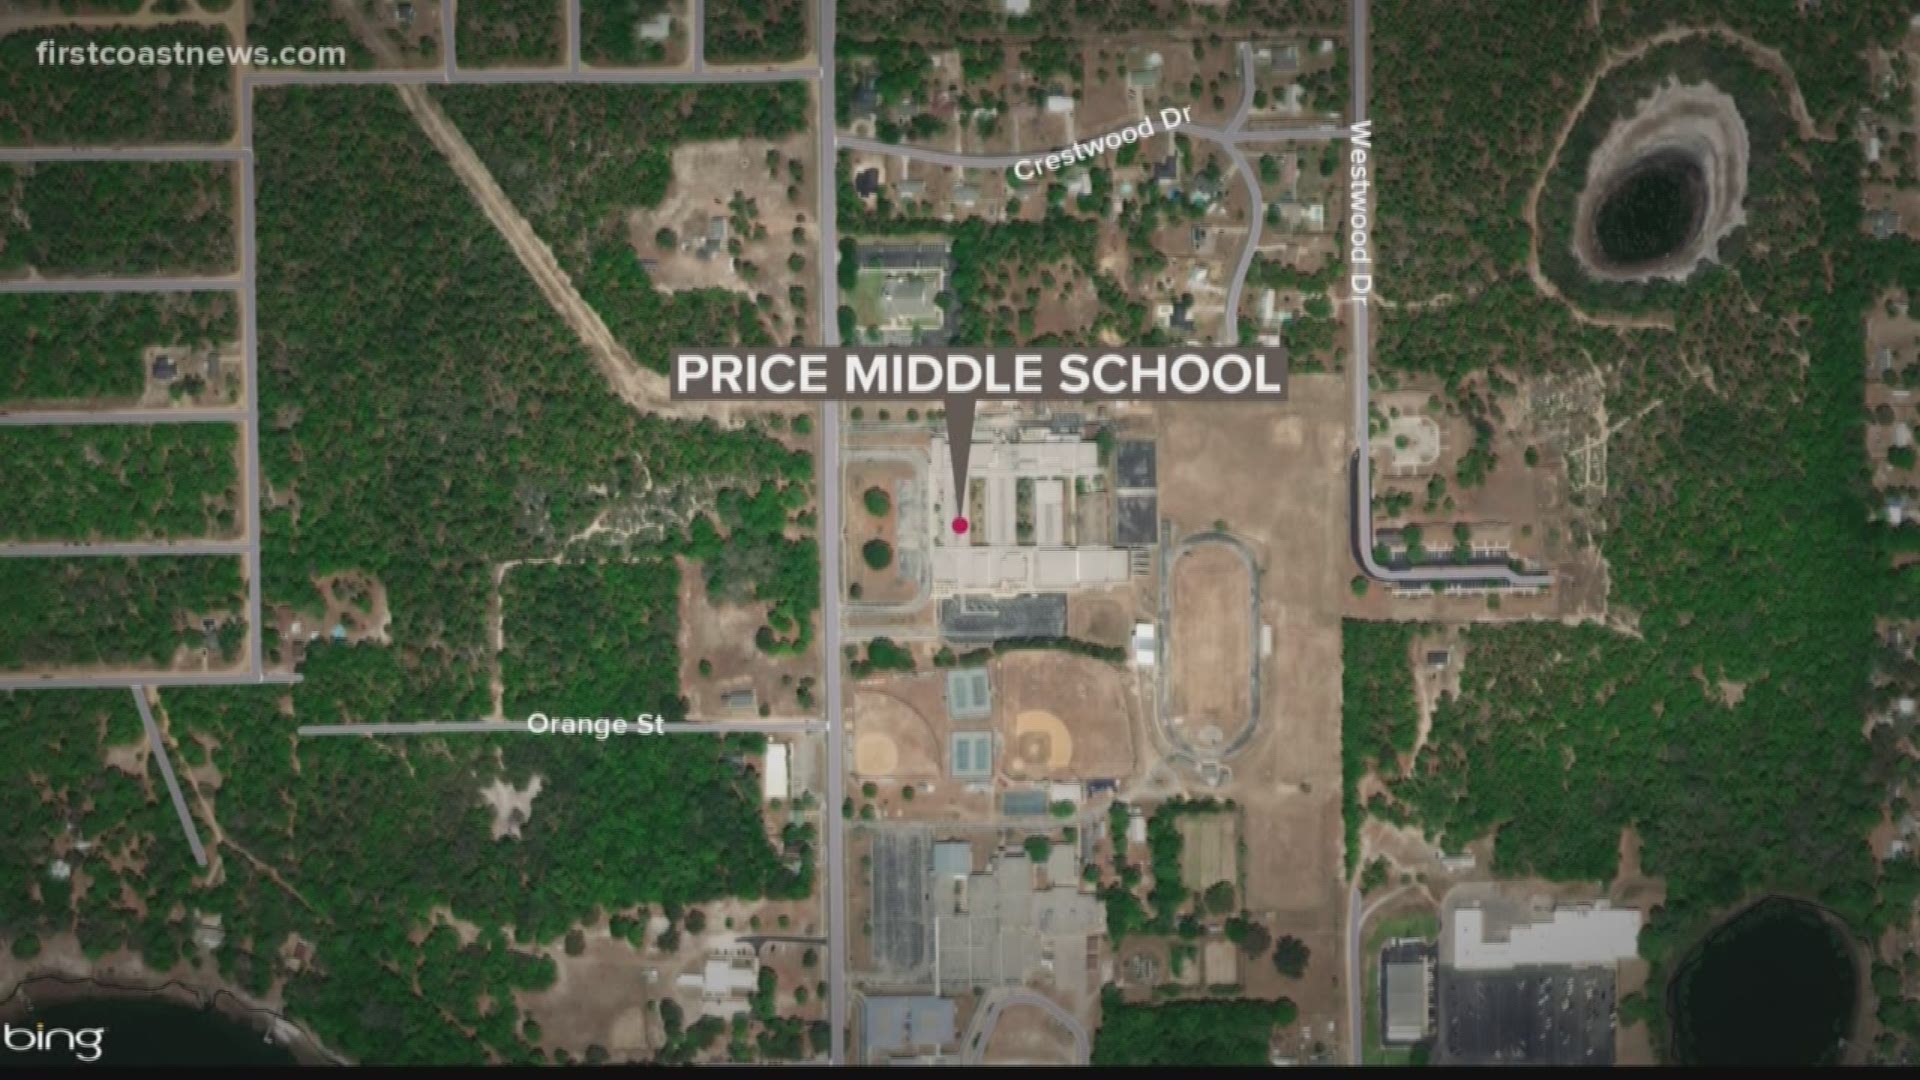 The student reportedly brought the loaded firearm onto C.H. Price Middle School, 140 County Road 315, deputies said.